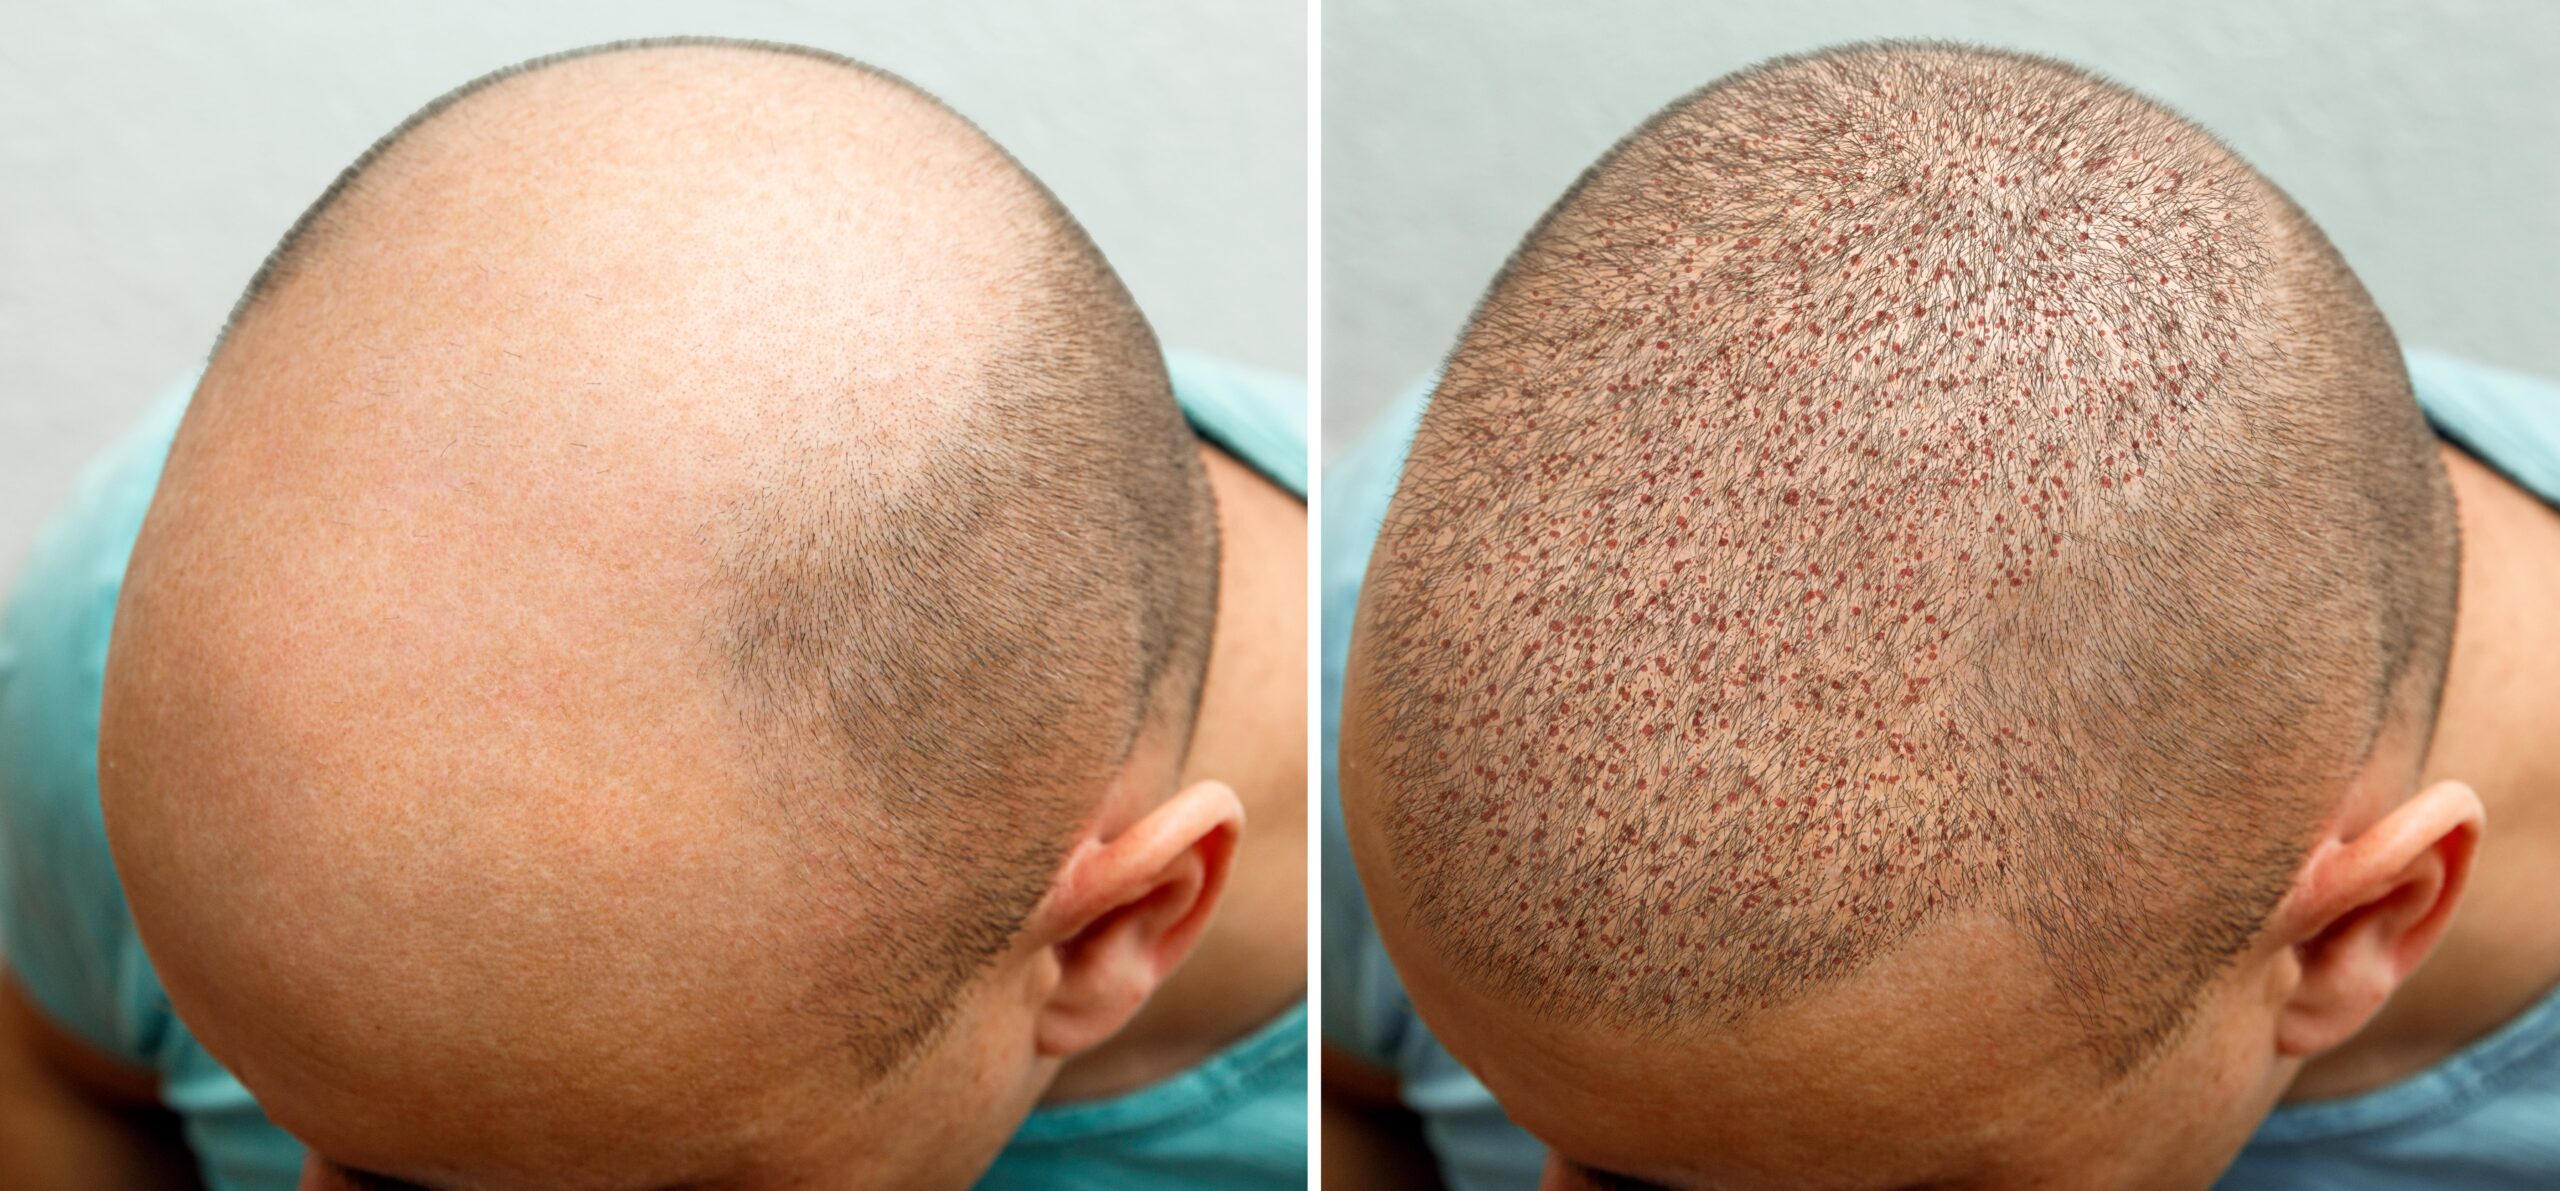 FUE Hair Transplant Before and After Process